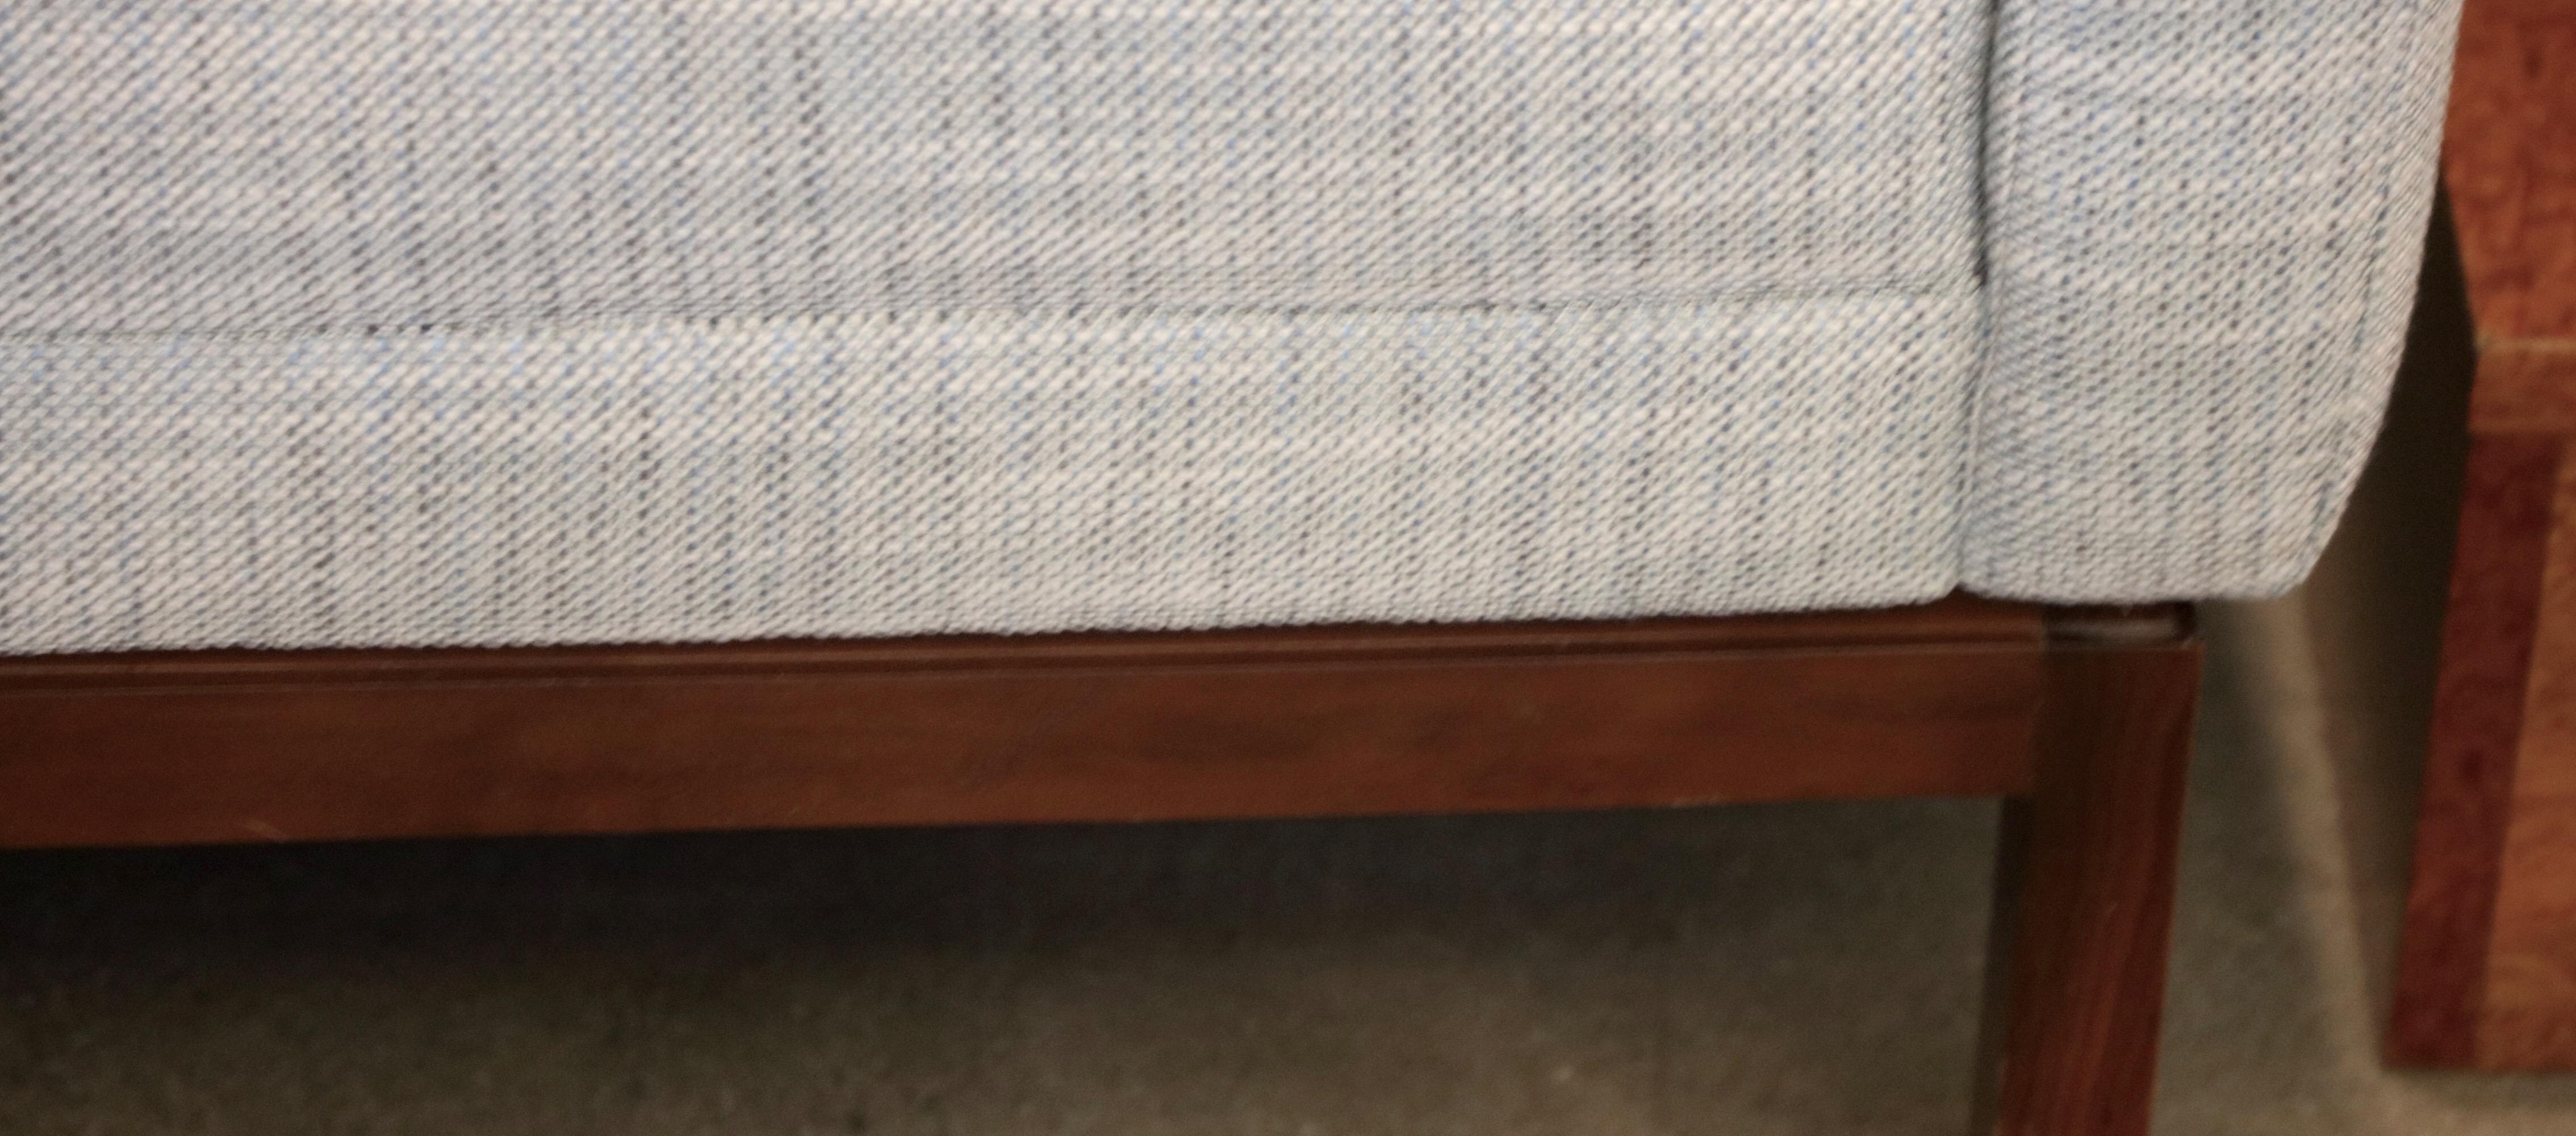 A Florence Knoll sofa from the 1960s redone and re-upholstered. Not Labelled, but was marked before upholstery. There are some minor marks to the walnut base.